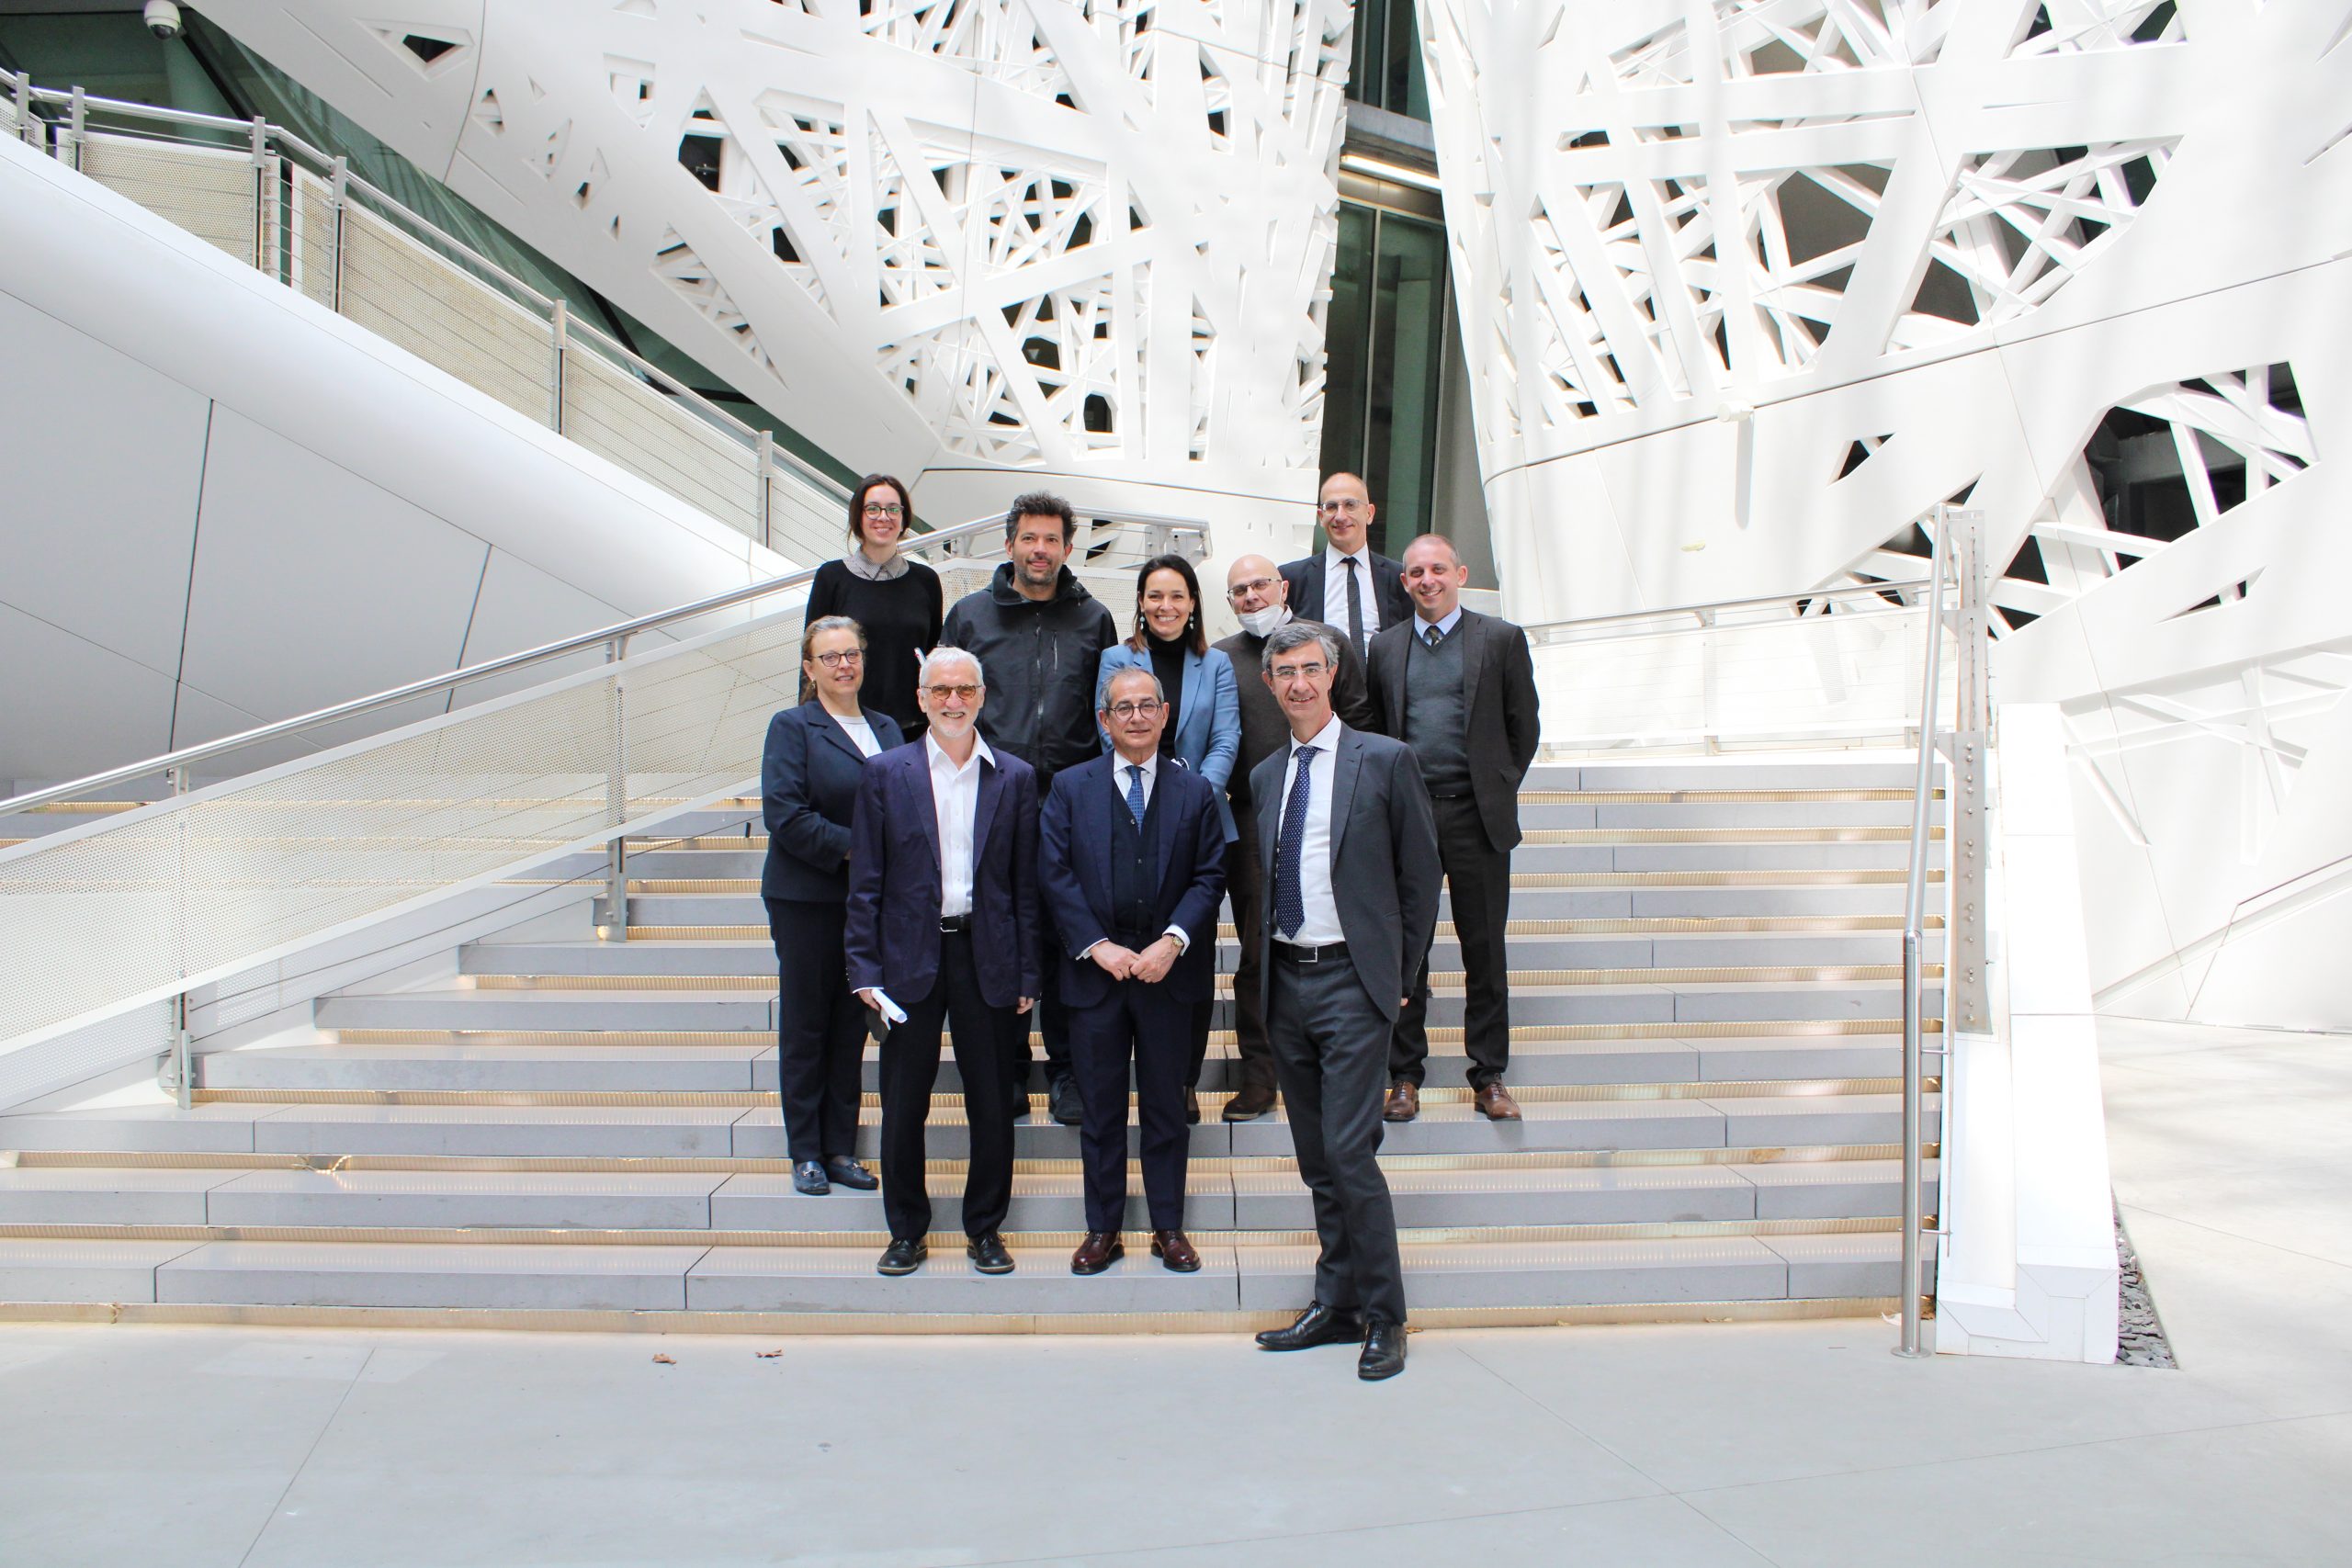 CITT hosts a delegation from Enea Tech and Biomedical Foundation